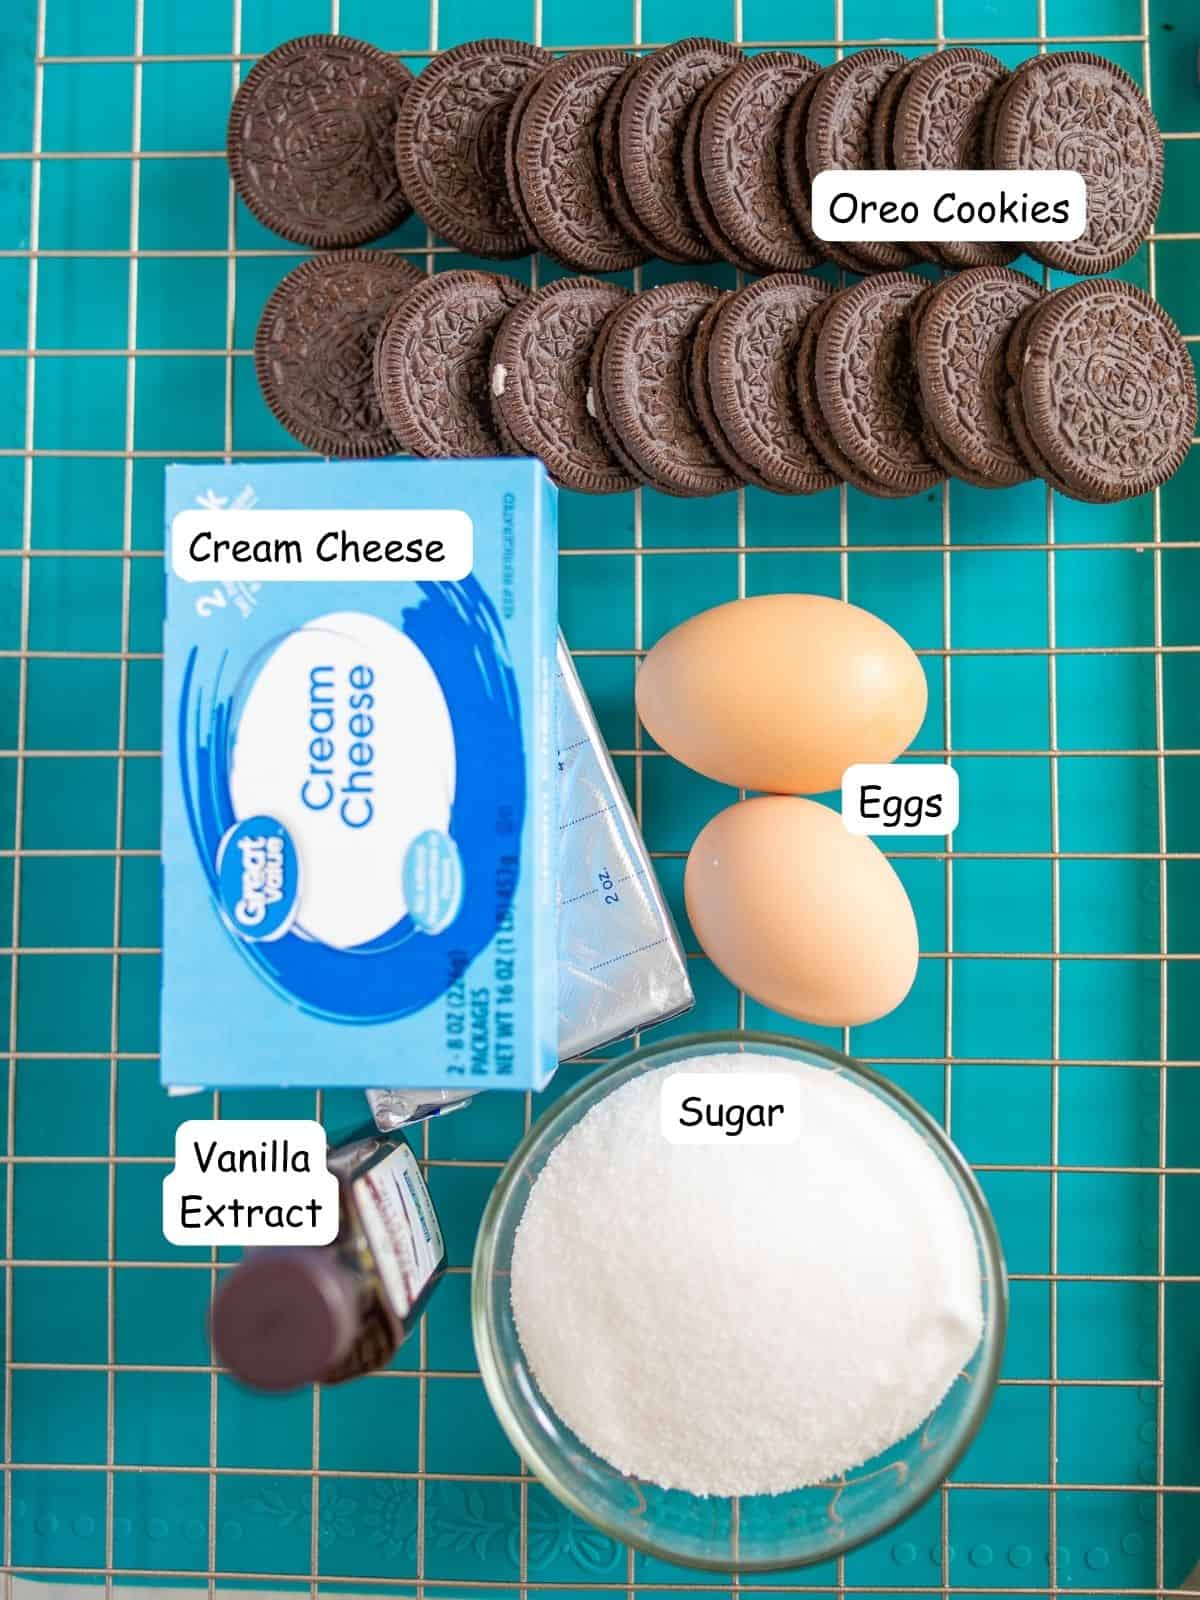 Ingredients for mini cheesecakes, cream cheese, Oreo cookies, sugar, eggs and vanilla extract.